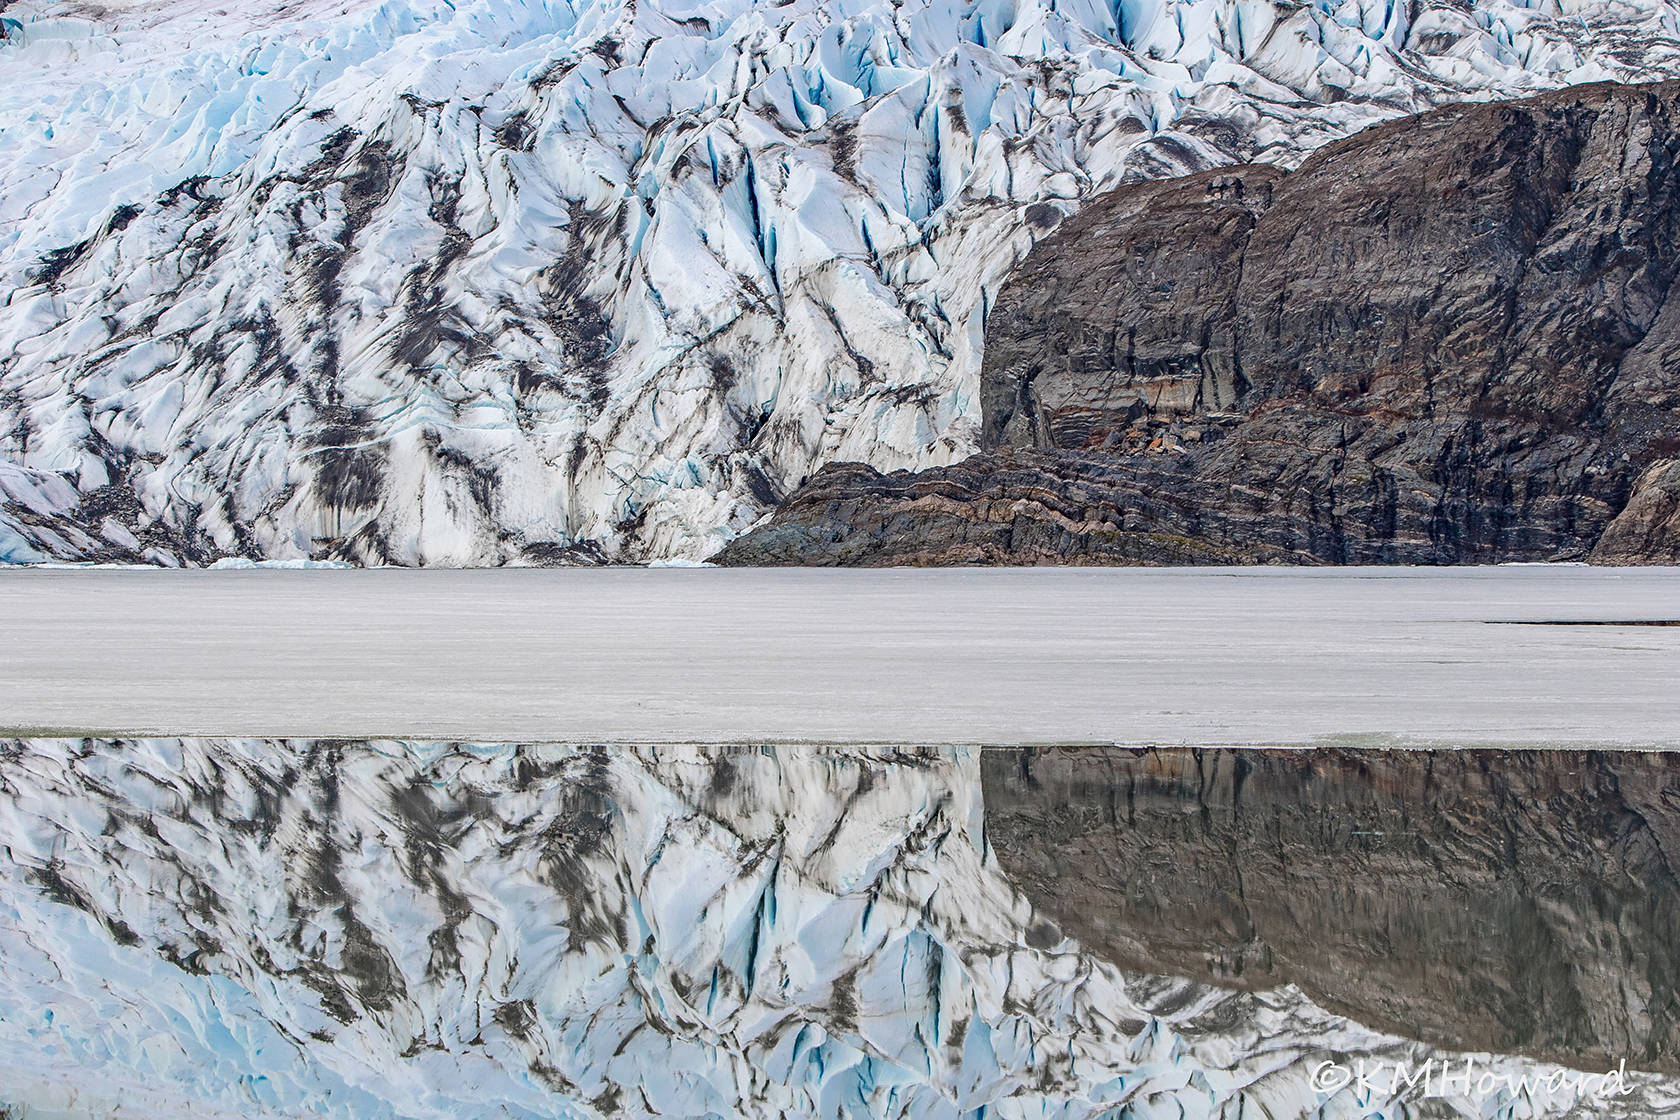 Glacier reflection at break-up on April 20. (Photo by Kerry Howard)